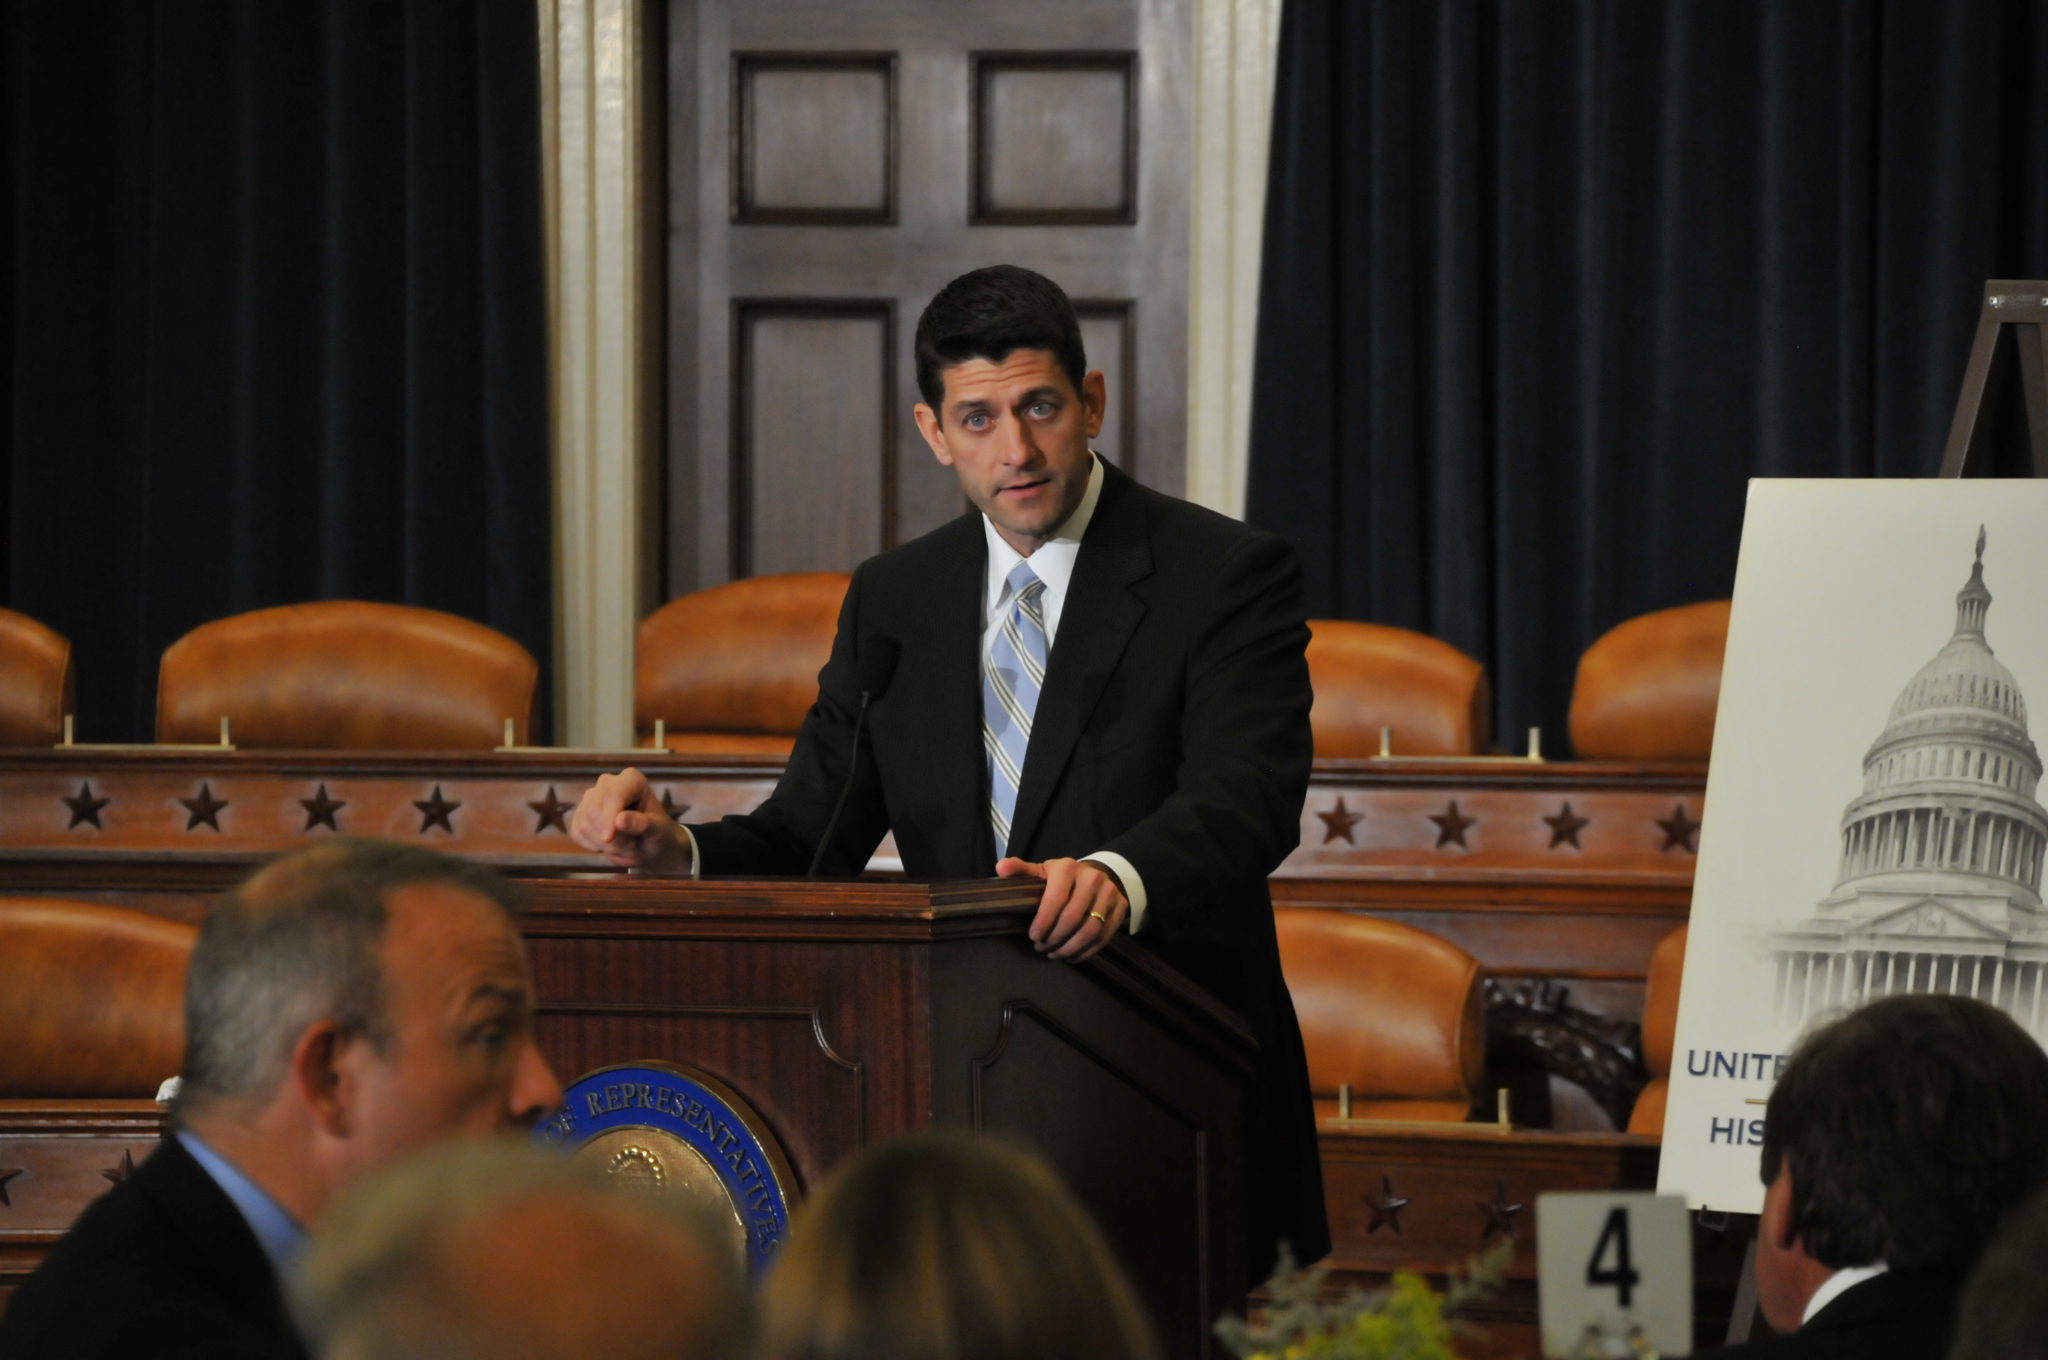 Former Chairman Paul Ryan speaks about his relationships with the former Chairmen at the 2017 House Committee on Ways and Means Reception. 
Photos (c) Bruce Guthrie